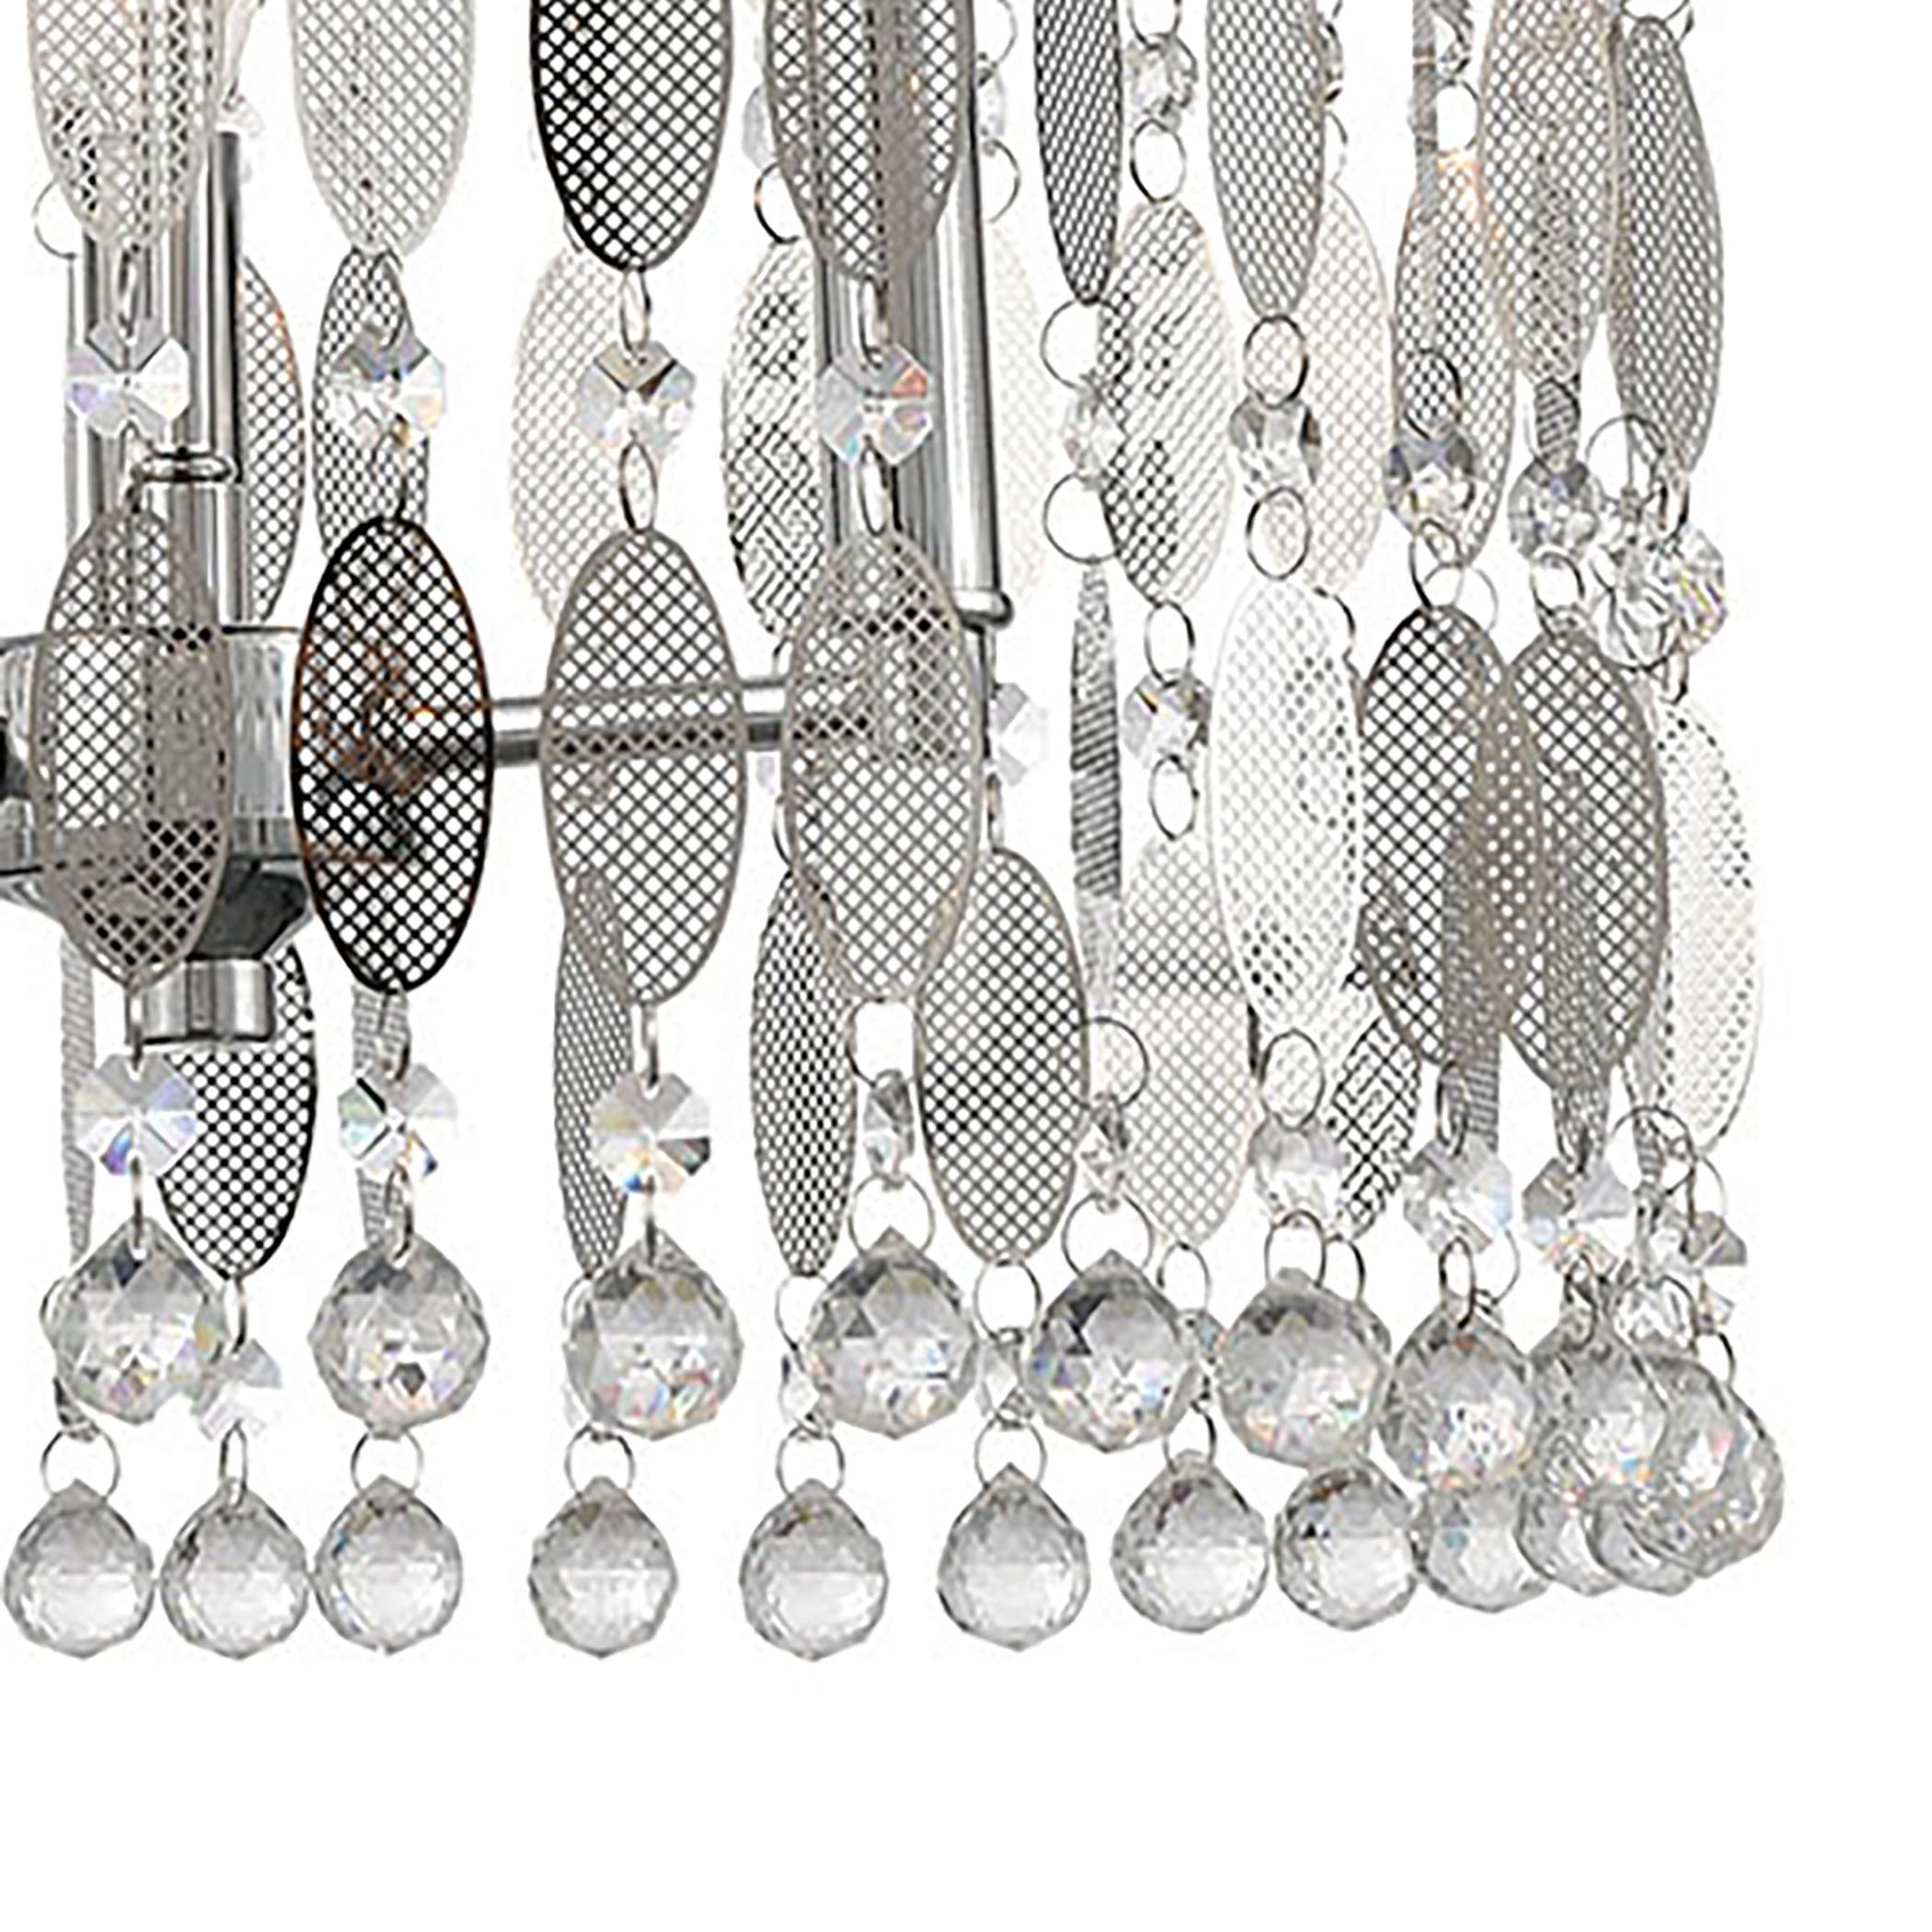 ELK Lighting 15381/3 Chamelon 3-Light Chandelier in Polished Chrome with Perforated Stainless and Clear Crystal